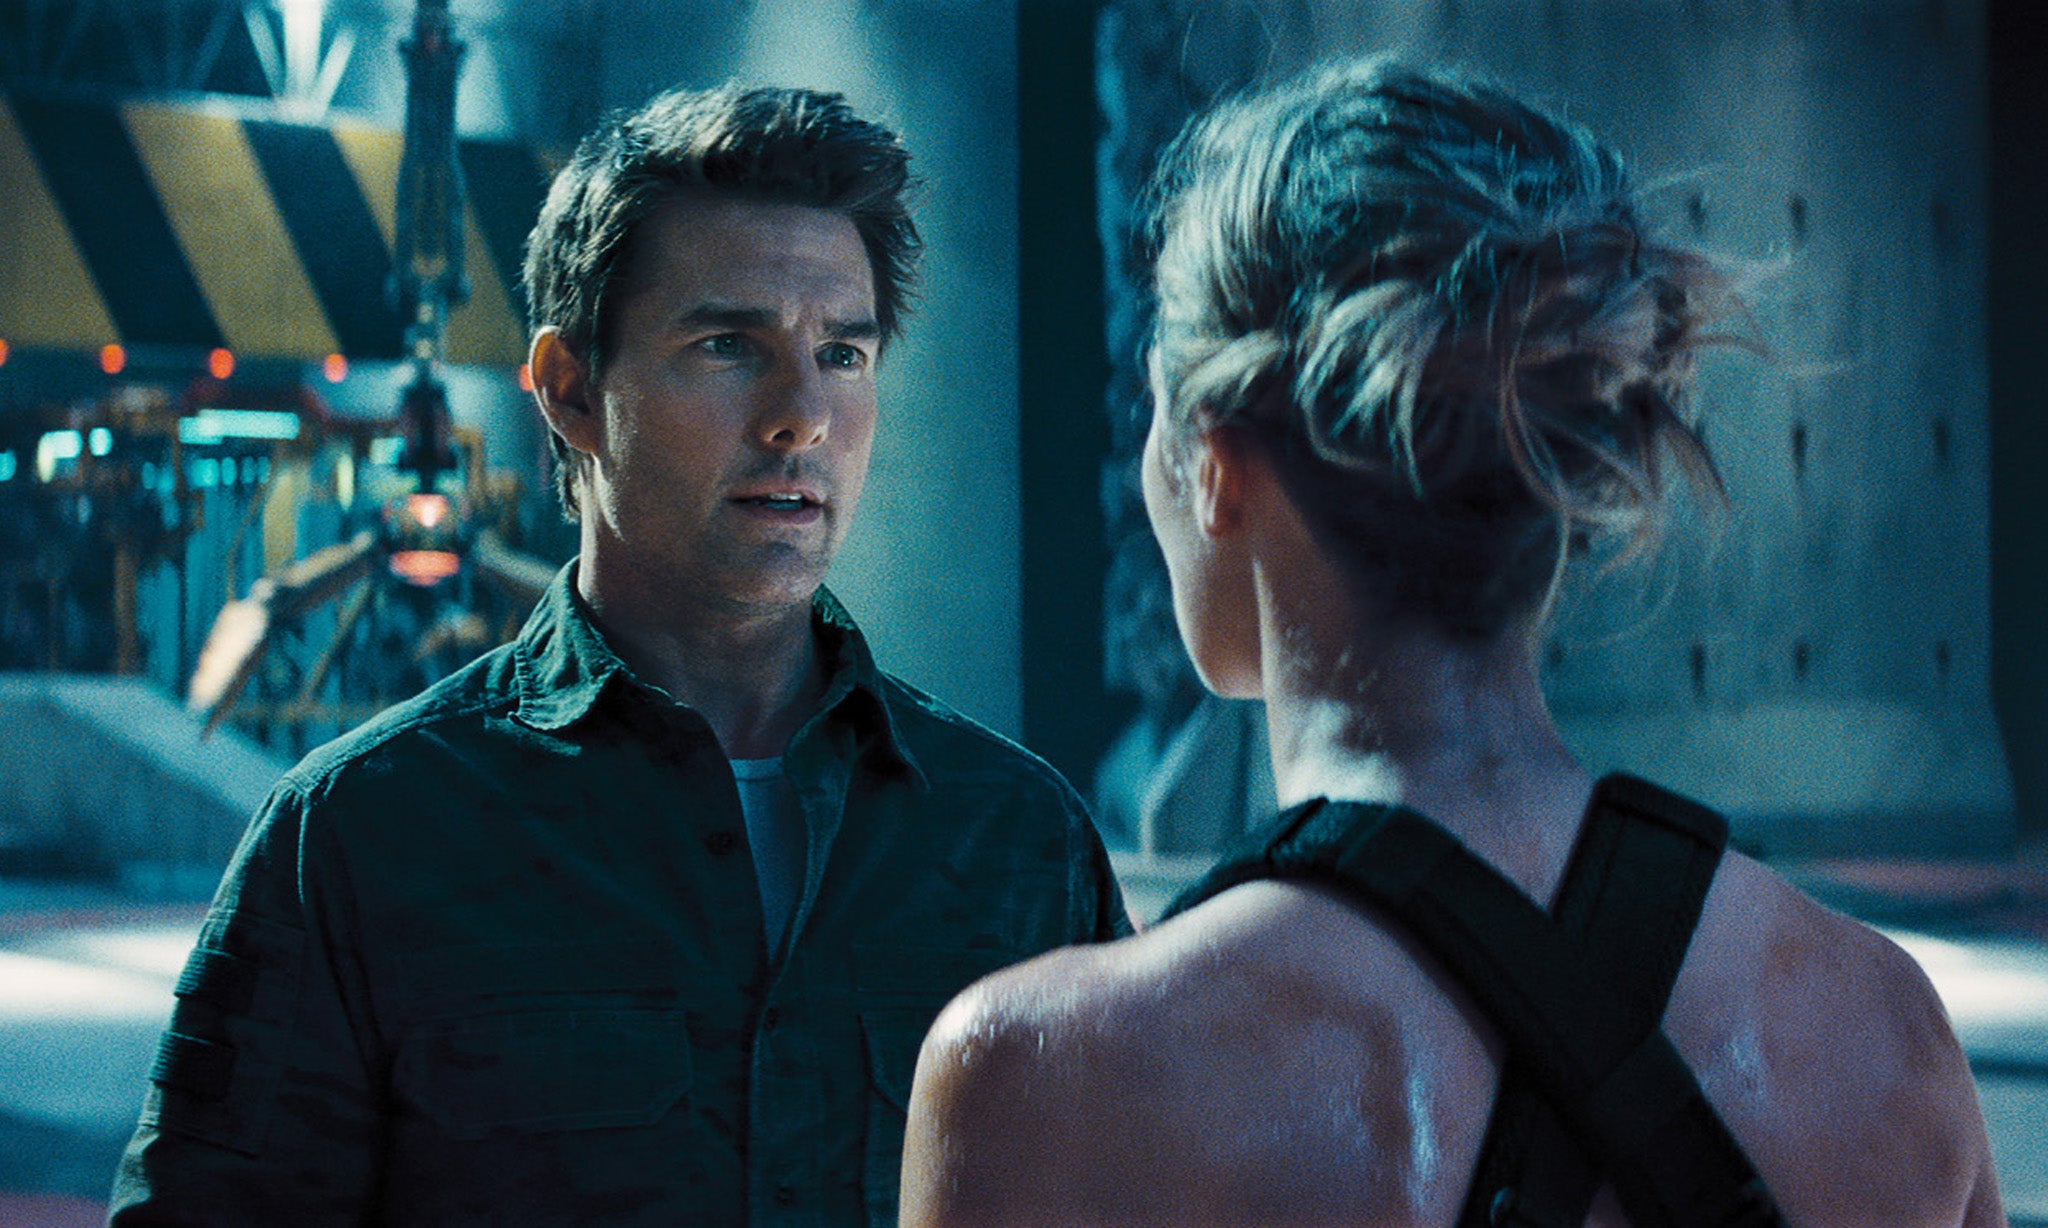 Tom Cruise and Emily Blunt in 'Edge of Tomorrow'